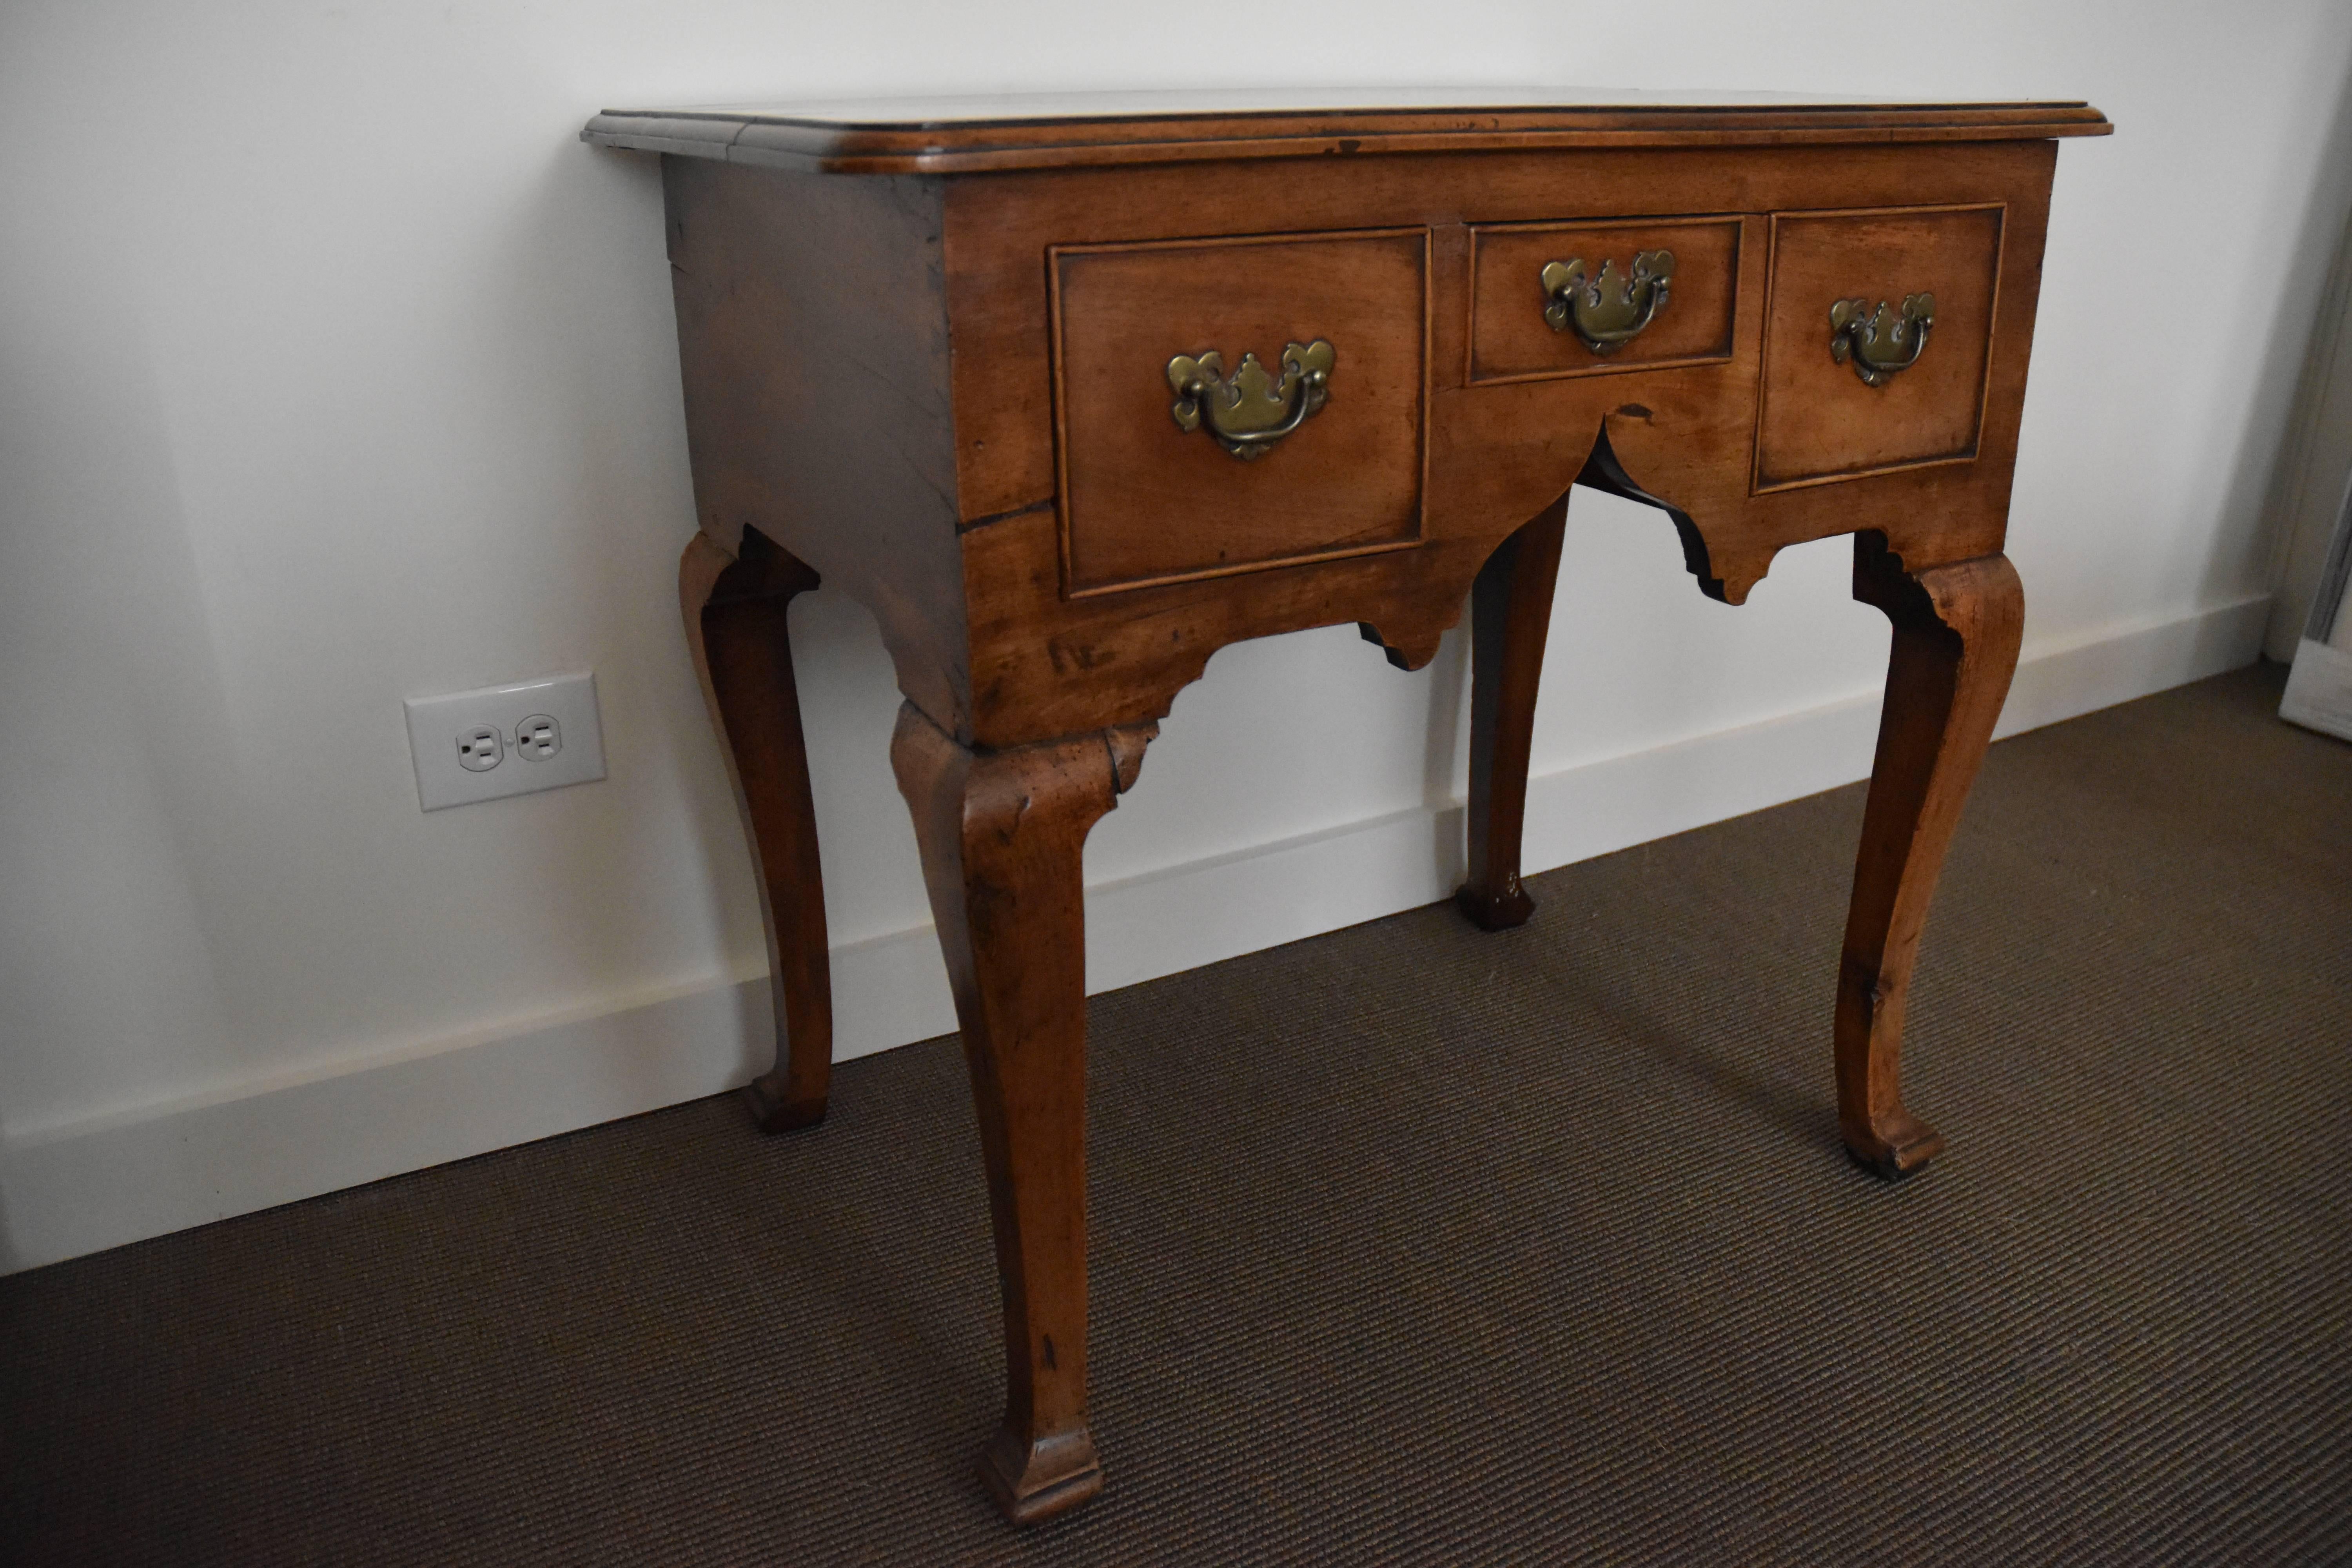 A lovely period Queen Anne lowboy on tapered legs with original brasses. The piece has a French polish and retains original brasses.